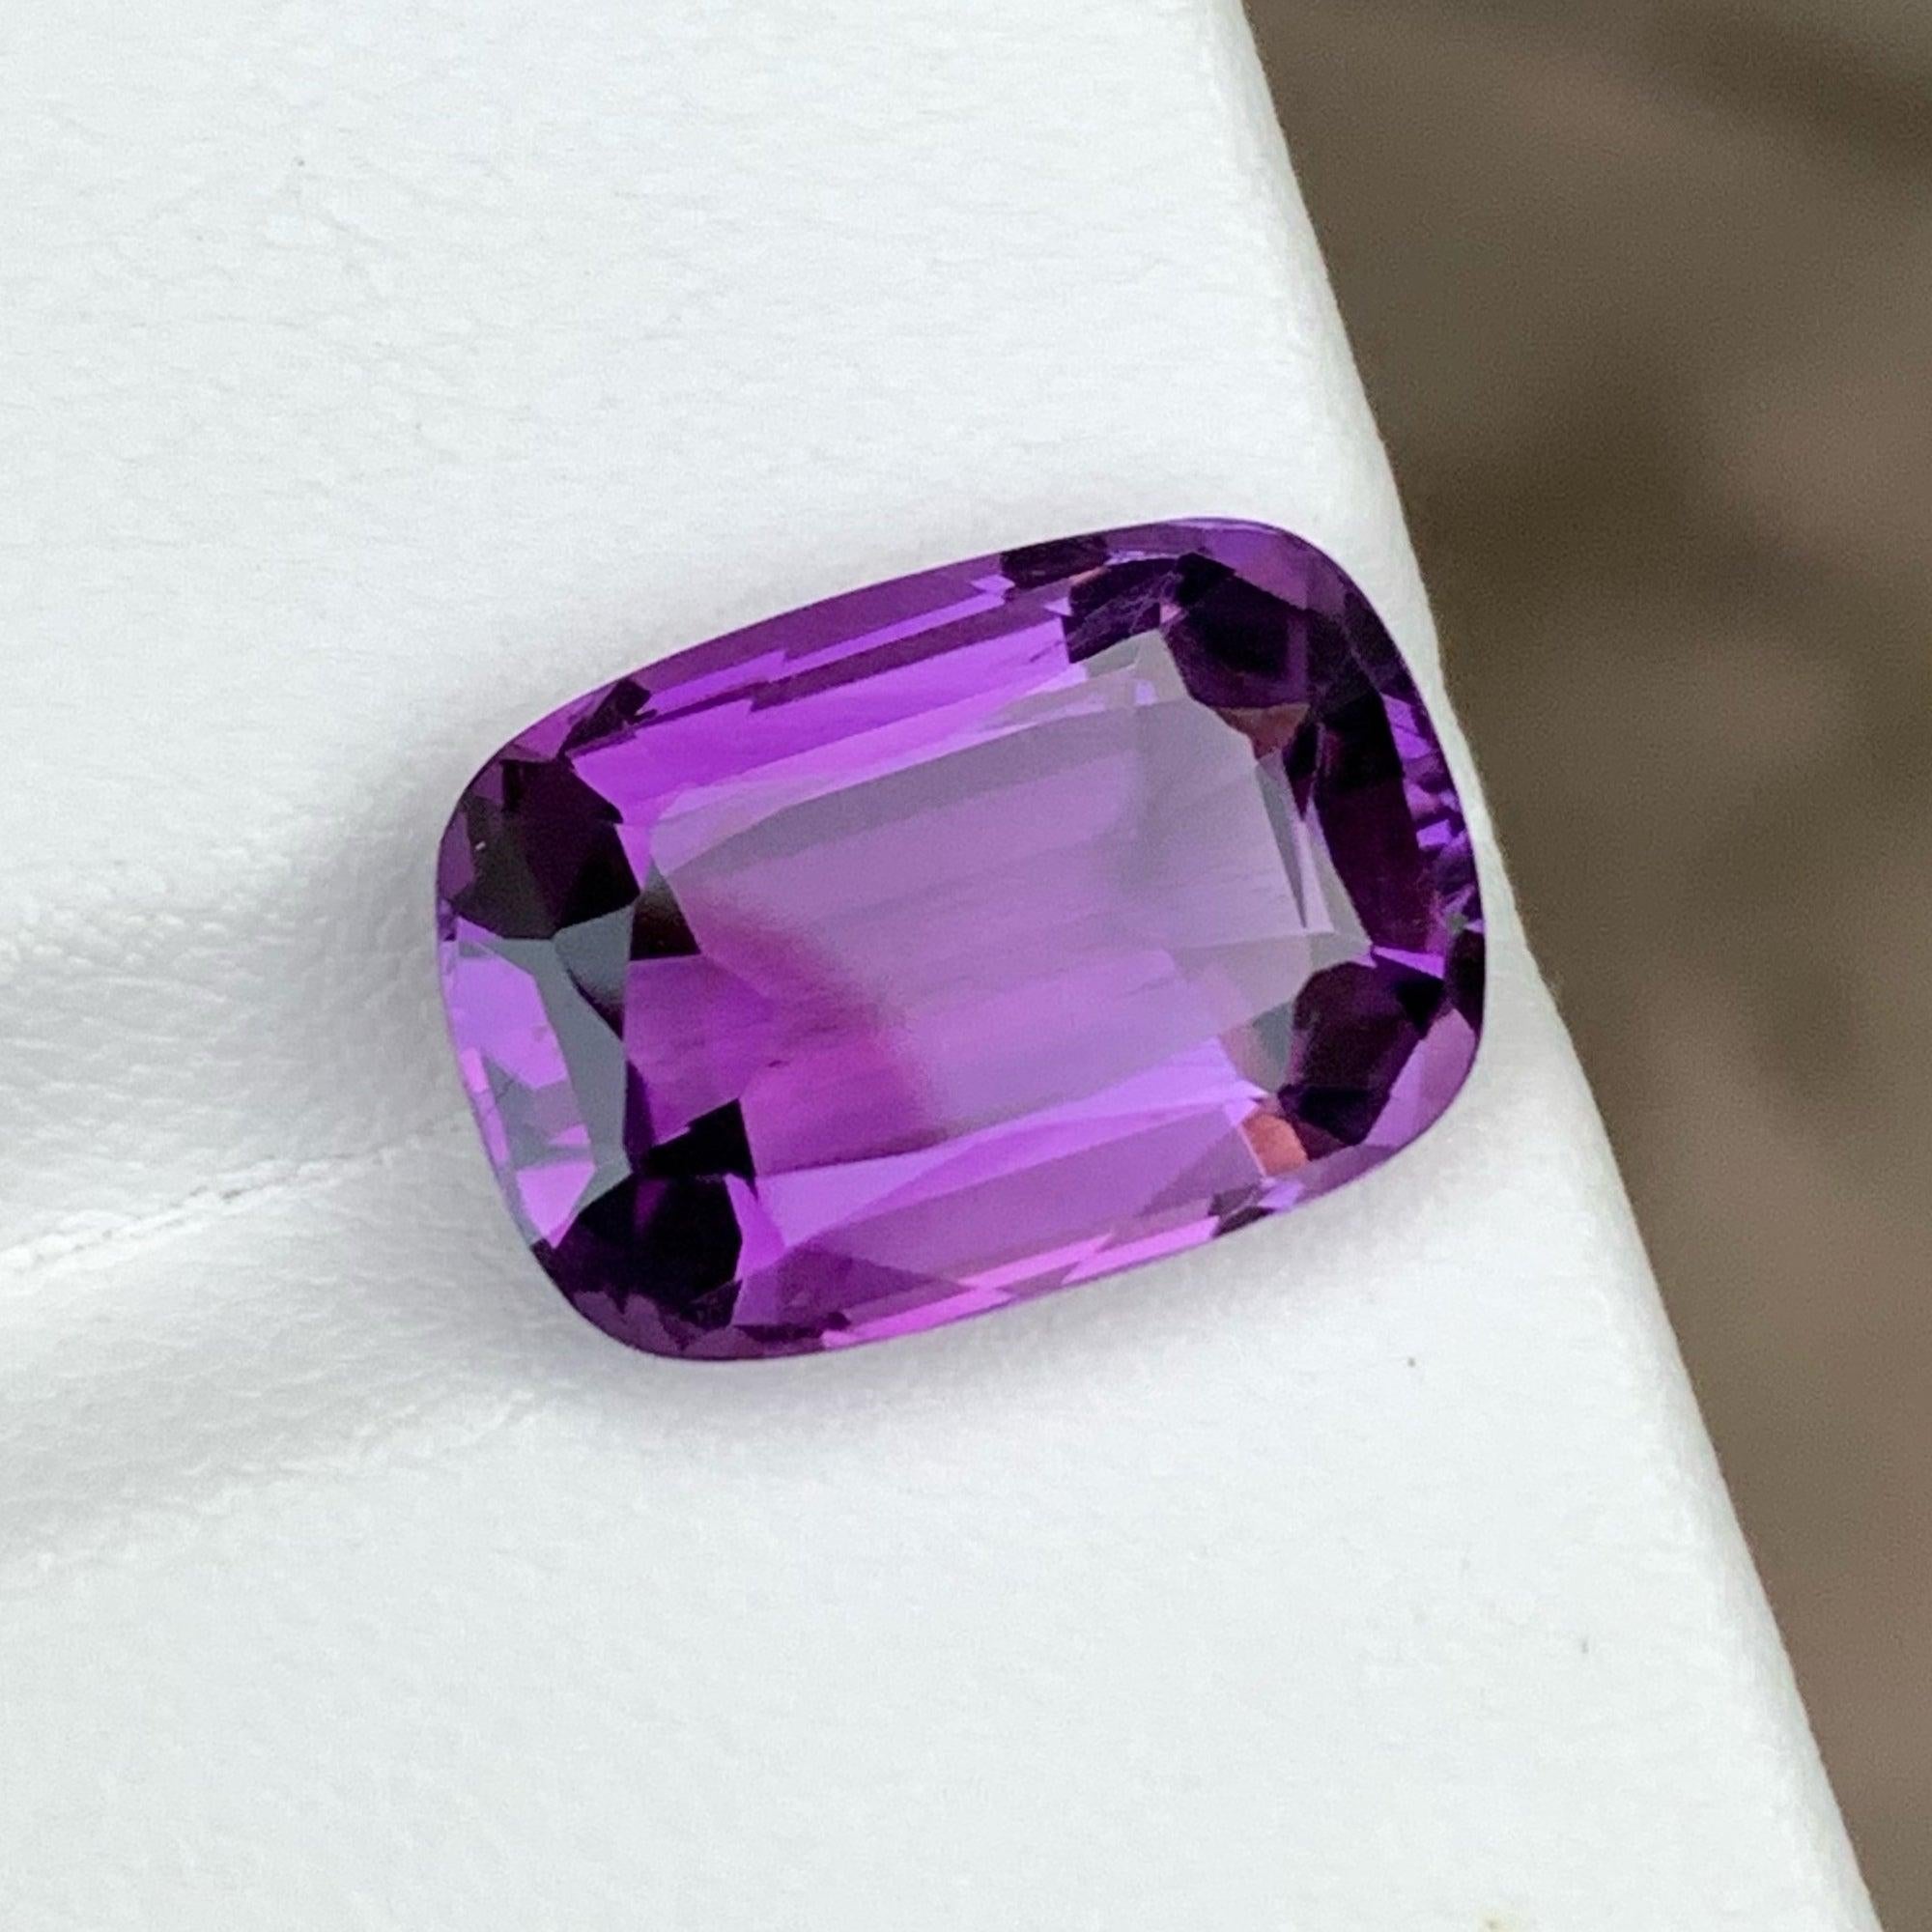 how much is a purple amethyst worth